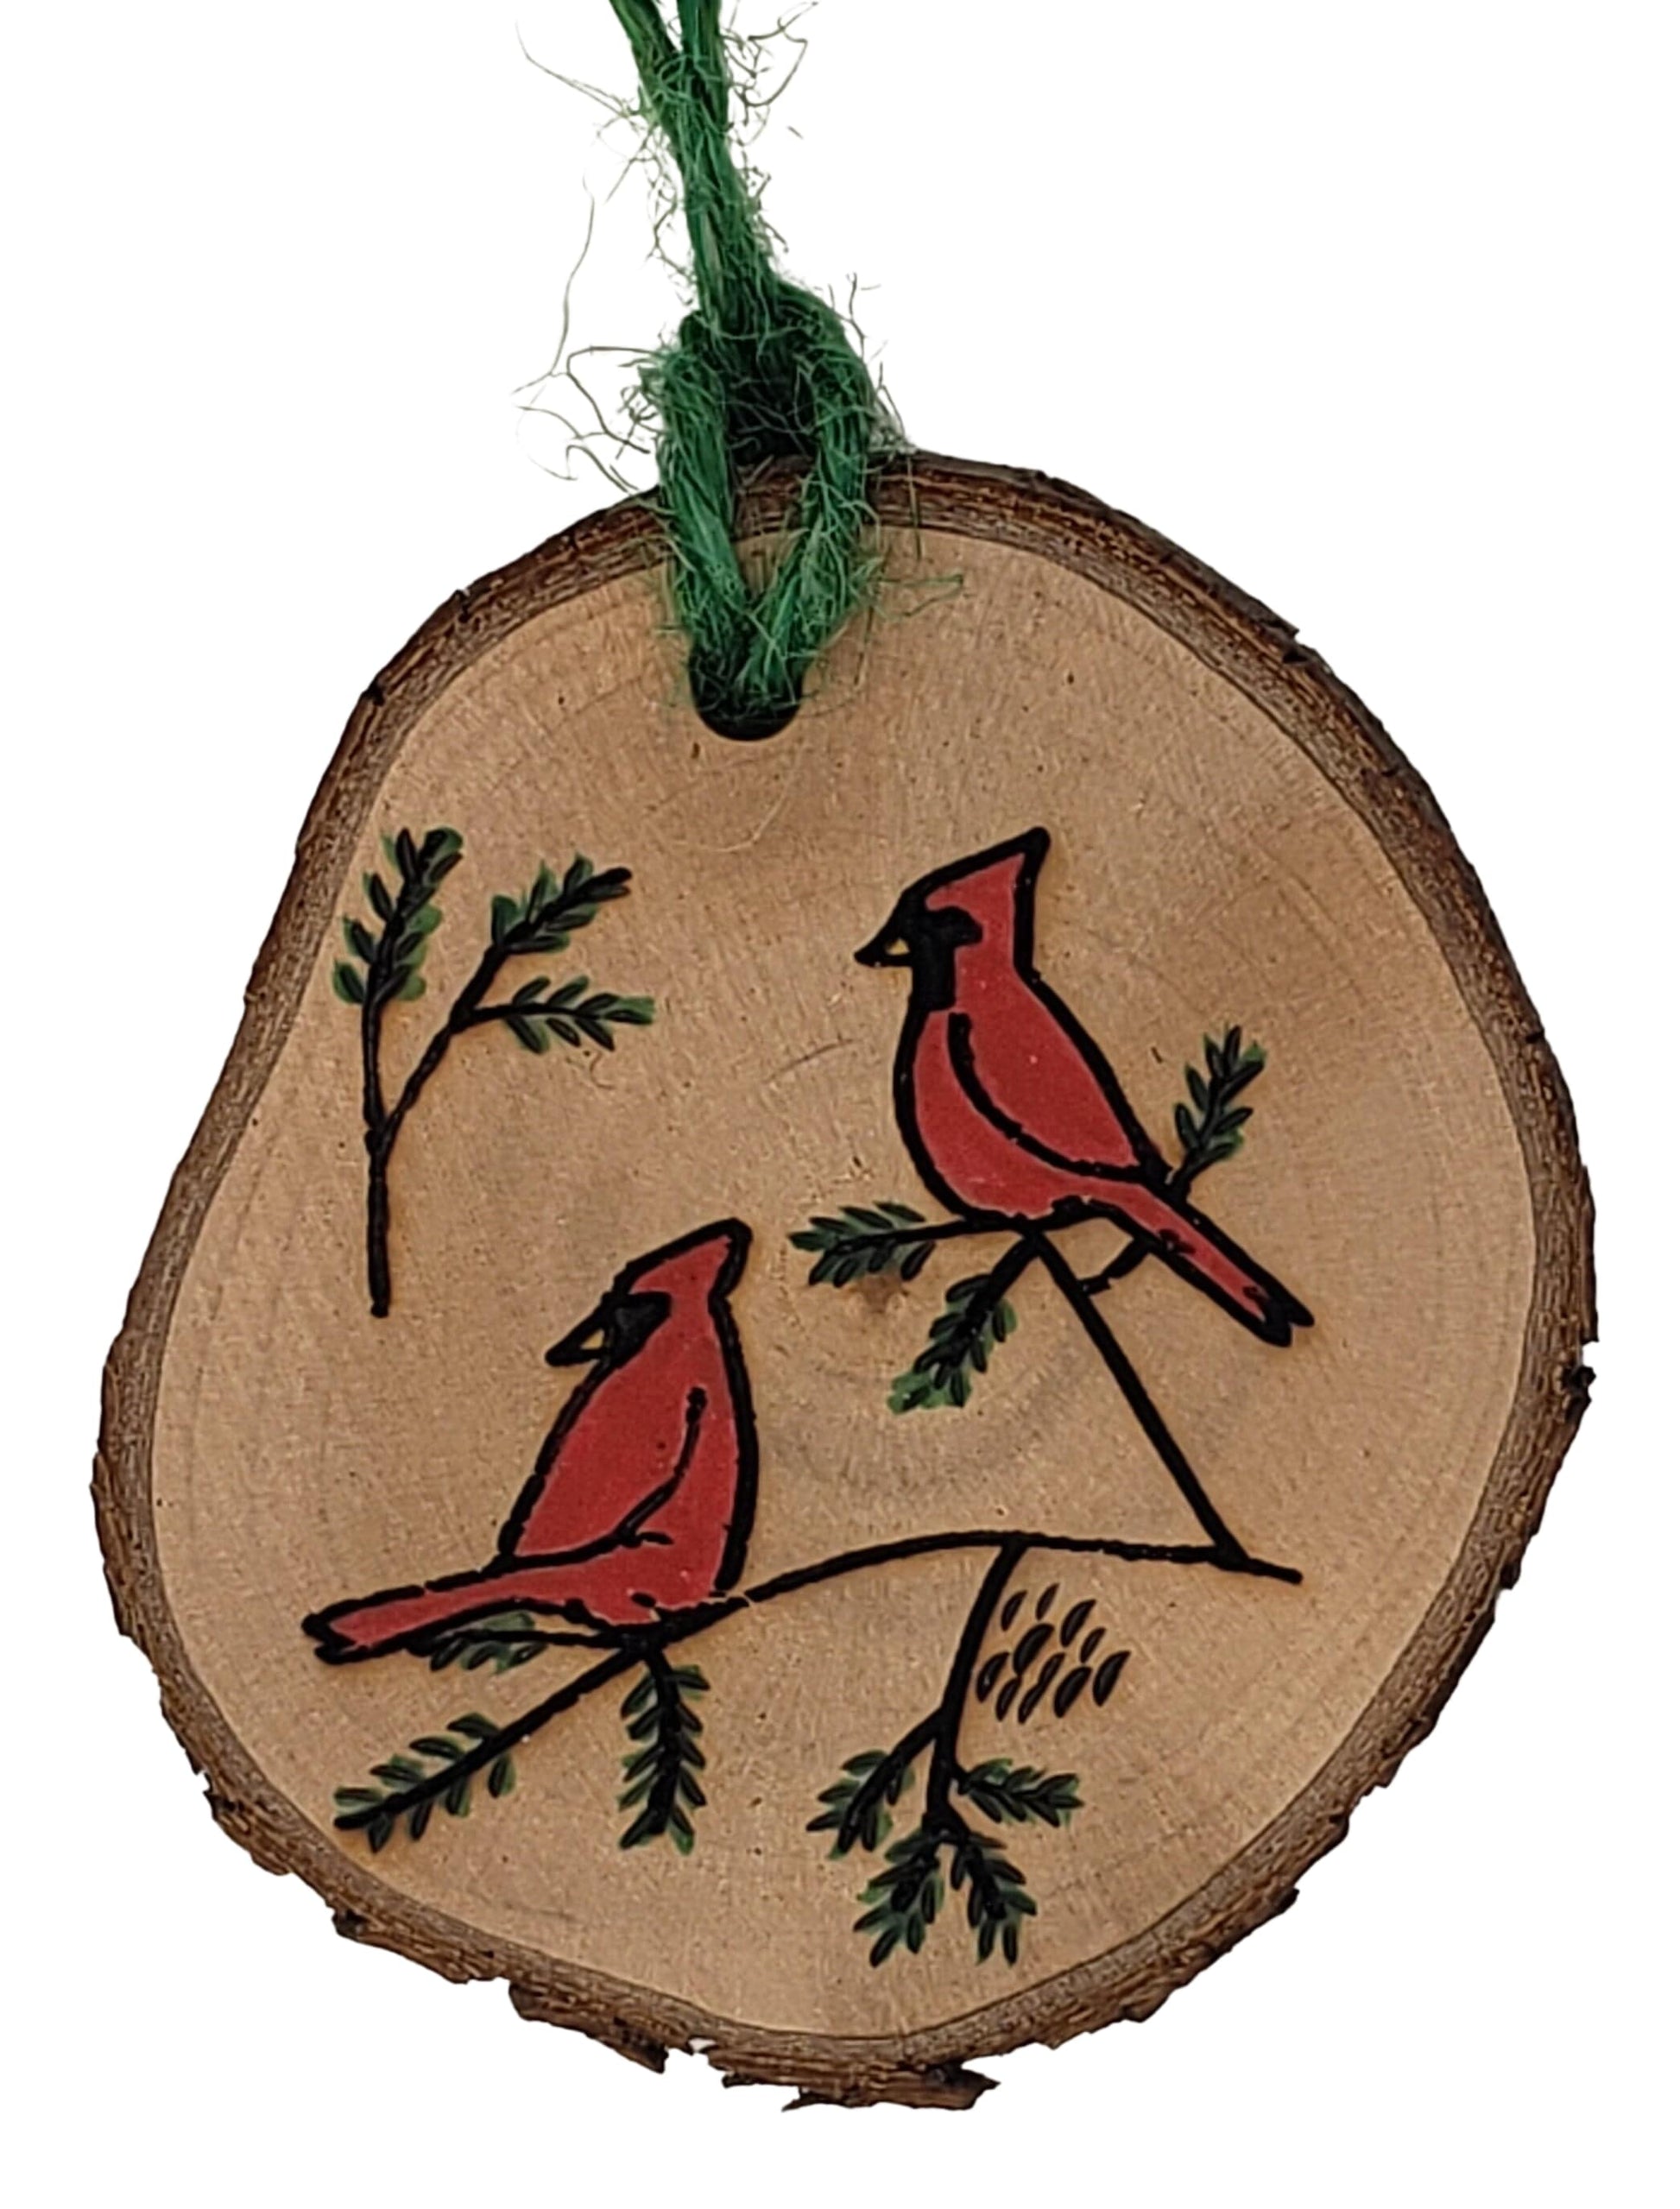 Natures Christmas- wood burned and hand painted cardinals Christmas tree ornament on maple wood